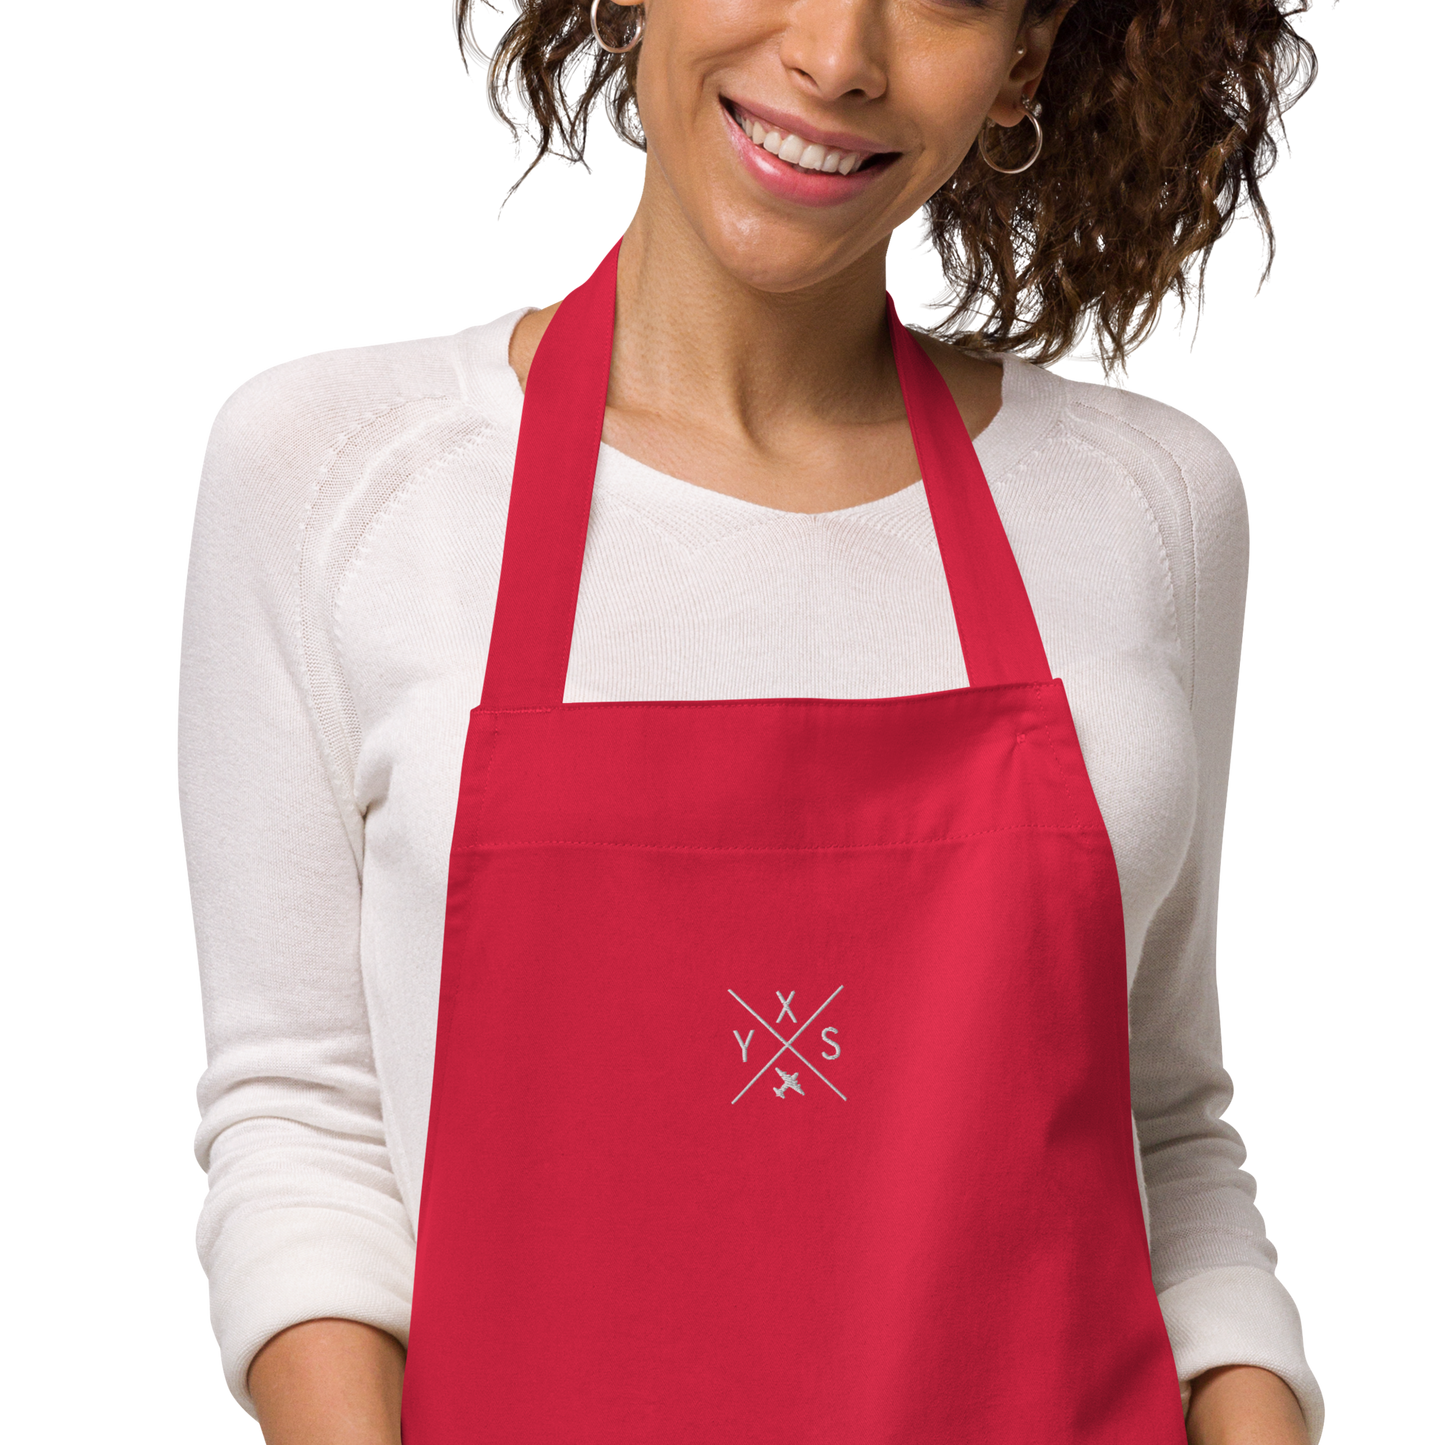 YHM Designs - YXS Prince George Organic Cotton Apron - Crossed-X Design with Airport Code and Vintage Propliner - White Embroidery - Image 06